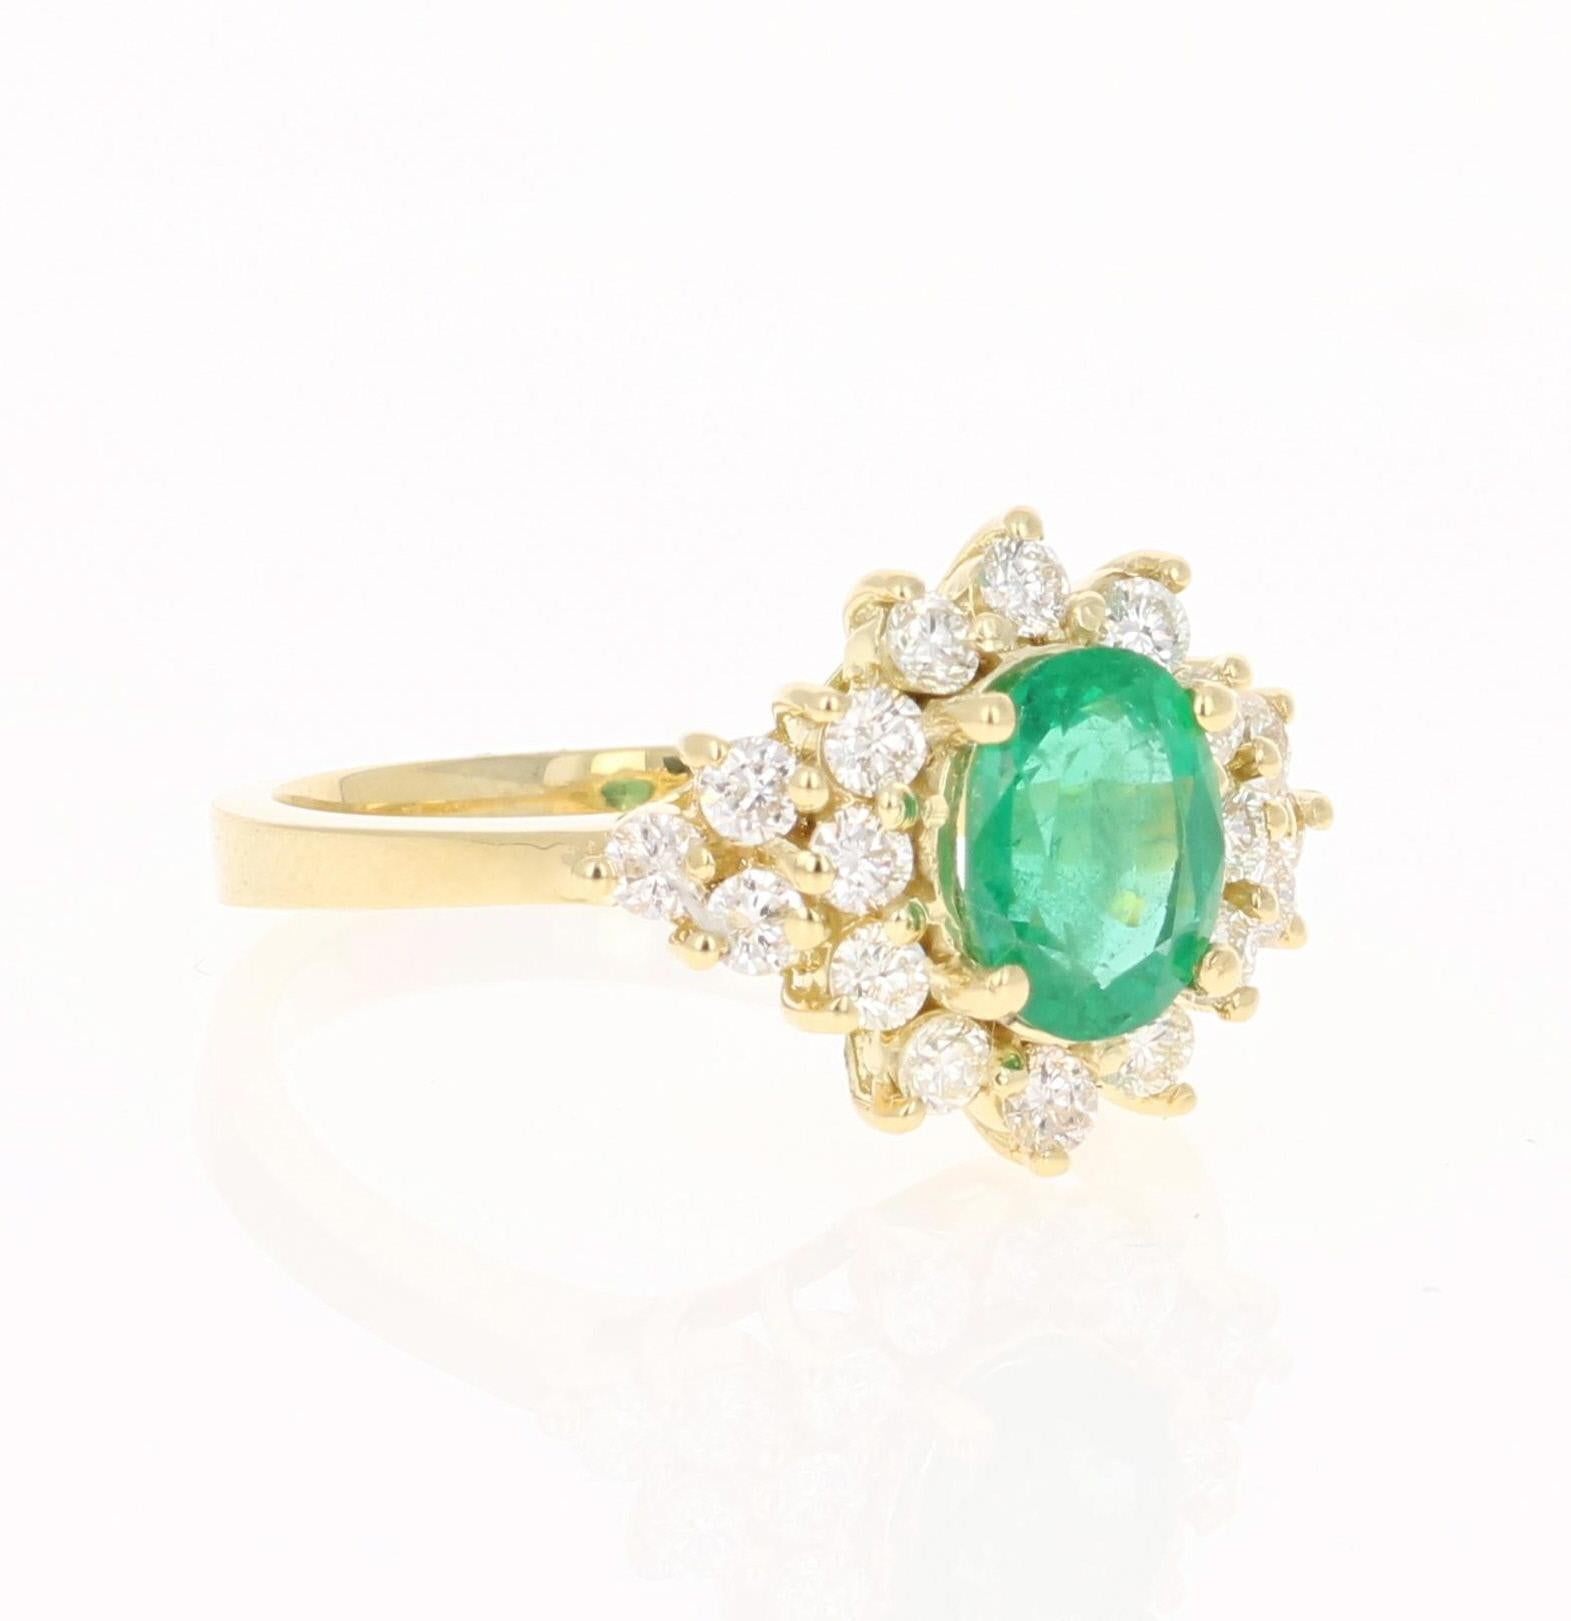 A beautiful 1.85 Carat Emerald and Diamond Ring in 18K Yellow Gold.
This gorgeous ring has a 1.15 Carat Oval Cut Emerald that is set in the center of the ring!  The Emerald is surrounded by 18 Round Cut Diamonds that weigh 0.70 cts. The Clarity is a